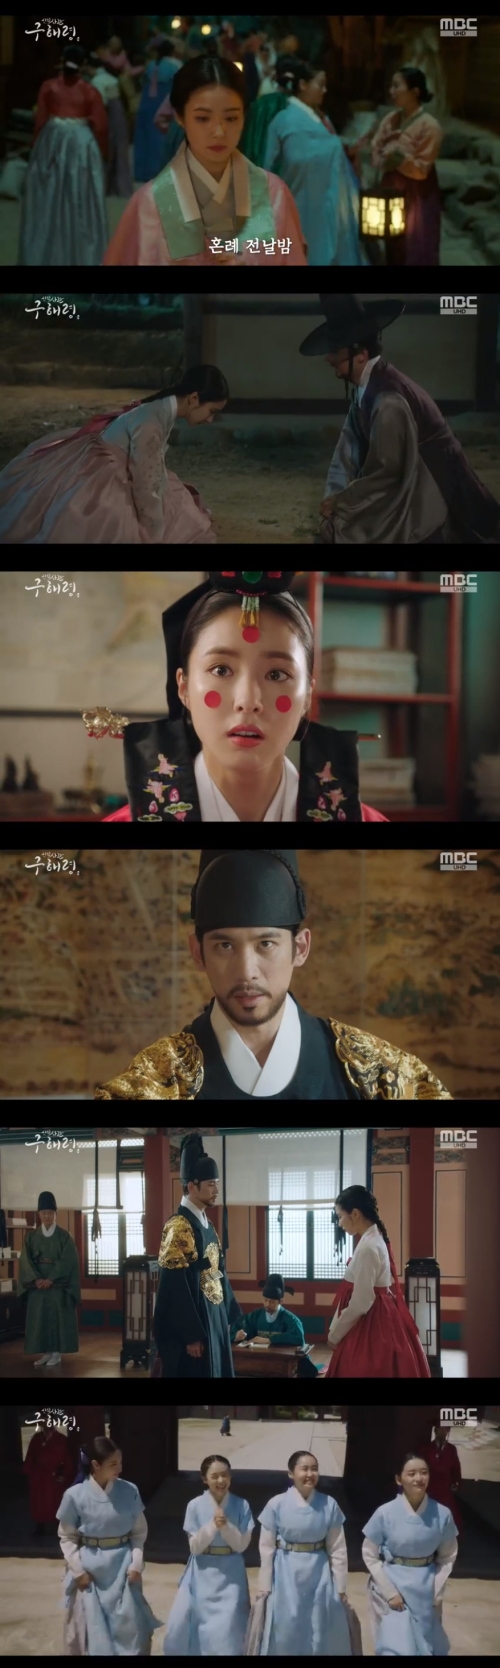 The new employee, Na Hae-ryung, passed the Ada Lovelace Star.In the 5th and 6th MBC drama Na Hae-ryung, which was broadcast on the 24th, Na Hae-ryung was suddenly restricted from Ada Lovelace.The night before Na Hae-ryungs Wedding Bible was drawn.Na Hae-ryung found the announcement of the Ada Lovelace Star City and went straight to the Wedding Bible opponent Sunbi.Then, Na Hae-ryung knelt before Sunbi and asked him to step back from the house.Sunbee, in great embarrassment, knelt down together in front of the old Na Hae-ryung, and comforted the old man who blamed him.But marriage is a promise of family, and it is not something that I can do because it is not what I want to do or what I want.After being broken up, I was worried about the situation of Na Hae-ryung.Then came the Wedding Bible Day, which was dressed in fine fashion without rejecting Wedding Bible.At this time, Sunbi said, I am sorry.I can not marry this marriage, he said, and he was delighted with Na Hae-ryung by rejecting Wedding Bible.Later, Na Hae-ryung went straight to the Ada Lovelace holiday, where he was puzzled by the given tense, saying, The tense is wrong. And after agonizing, he posted a direct statement:The officials who saw the answer of Na Hae-ryung were deeply indignant, saying that they were arrogant.At that moment, Lee Jin (Park Ki-woong) appeared to check the answers directly, and he was thoughtful of the direct words of Na Hae-ryung.The problem Lee Jin raised was a way to stop the eclipse.Na Hae-ryung wrote that interpreting natural phenomena is only a persons will, and that it is bad because it is afraid and afraid because it does not know.Na Hae-ryung wrote, Baro knows and sees Baro.Lee Jin, who saw that this is the only way to prevent the Japanese eclipse, said, It is a very ridiculous direct statement.Lee Jin then brought Na Hae-ryung to the East Palace.He asked the names of those killed while directing to the former Na Hae-ryung, and was nervous, and said, Do you think my tense is wrong? Did I think I was wrong?Na Hae-ryung didnt stand to speak, even in a state of full tension.He said, If you think that there is a way to prevent the eclipse, it is wrong. He said that people can not stop the sky and that old-fashioned rituals are not a way to end the eclipse.Lee Jin admonished that old-fashioned rituals are a way to comfort the people, and learning and obtaining knowledge through bookkeeping is also a way only for those who grow up to be precious, such as himself and Na Hae-ryung.When Lee Jin asked, So my tense, your directive is wrong, is there any disagreement? Koo was shocked and did not answer.After that, a classmate was announced. Koo was called a classmate at the Ada Lovelace Star City and was delighted.But the joy was a moment: Four Ada Lovelace, including Koo Hae-ryung and Song Sa-hee, were not treated by existing officials and were only laughed at.Na Hae-ryung said, Teach me well to be a good officer. However, Min Woo-won (Lee Ji-hoon) nailed You are not a officer.In addition, officials did all sorts of chores to Ada Lovelace and did not handle them properly, even giving them no food and making them turn around twenty times.Lee Jin, meanwhile, presented Lee Lim (Cha Eun-woo) with a plaque; Lee Jin advised him to go out to Onyang for an excuse for skin disease, and Irim left the palace with great joy.The first thing Irim did was to follow the trail of Na Hae-ryung.Lee visited the owner of the bookstore and found out the name of the old Hae-ryung, raising questions about future moves.Later, Irim arrived in Onyang and had a nightmare while enjoying the hot springs; he was surprised to find himself and the monument that died in his dream, and dug the ground in search of the monument in his dream.